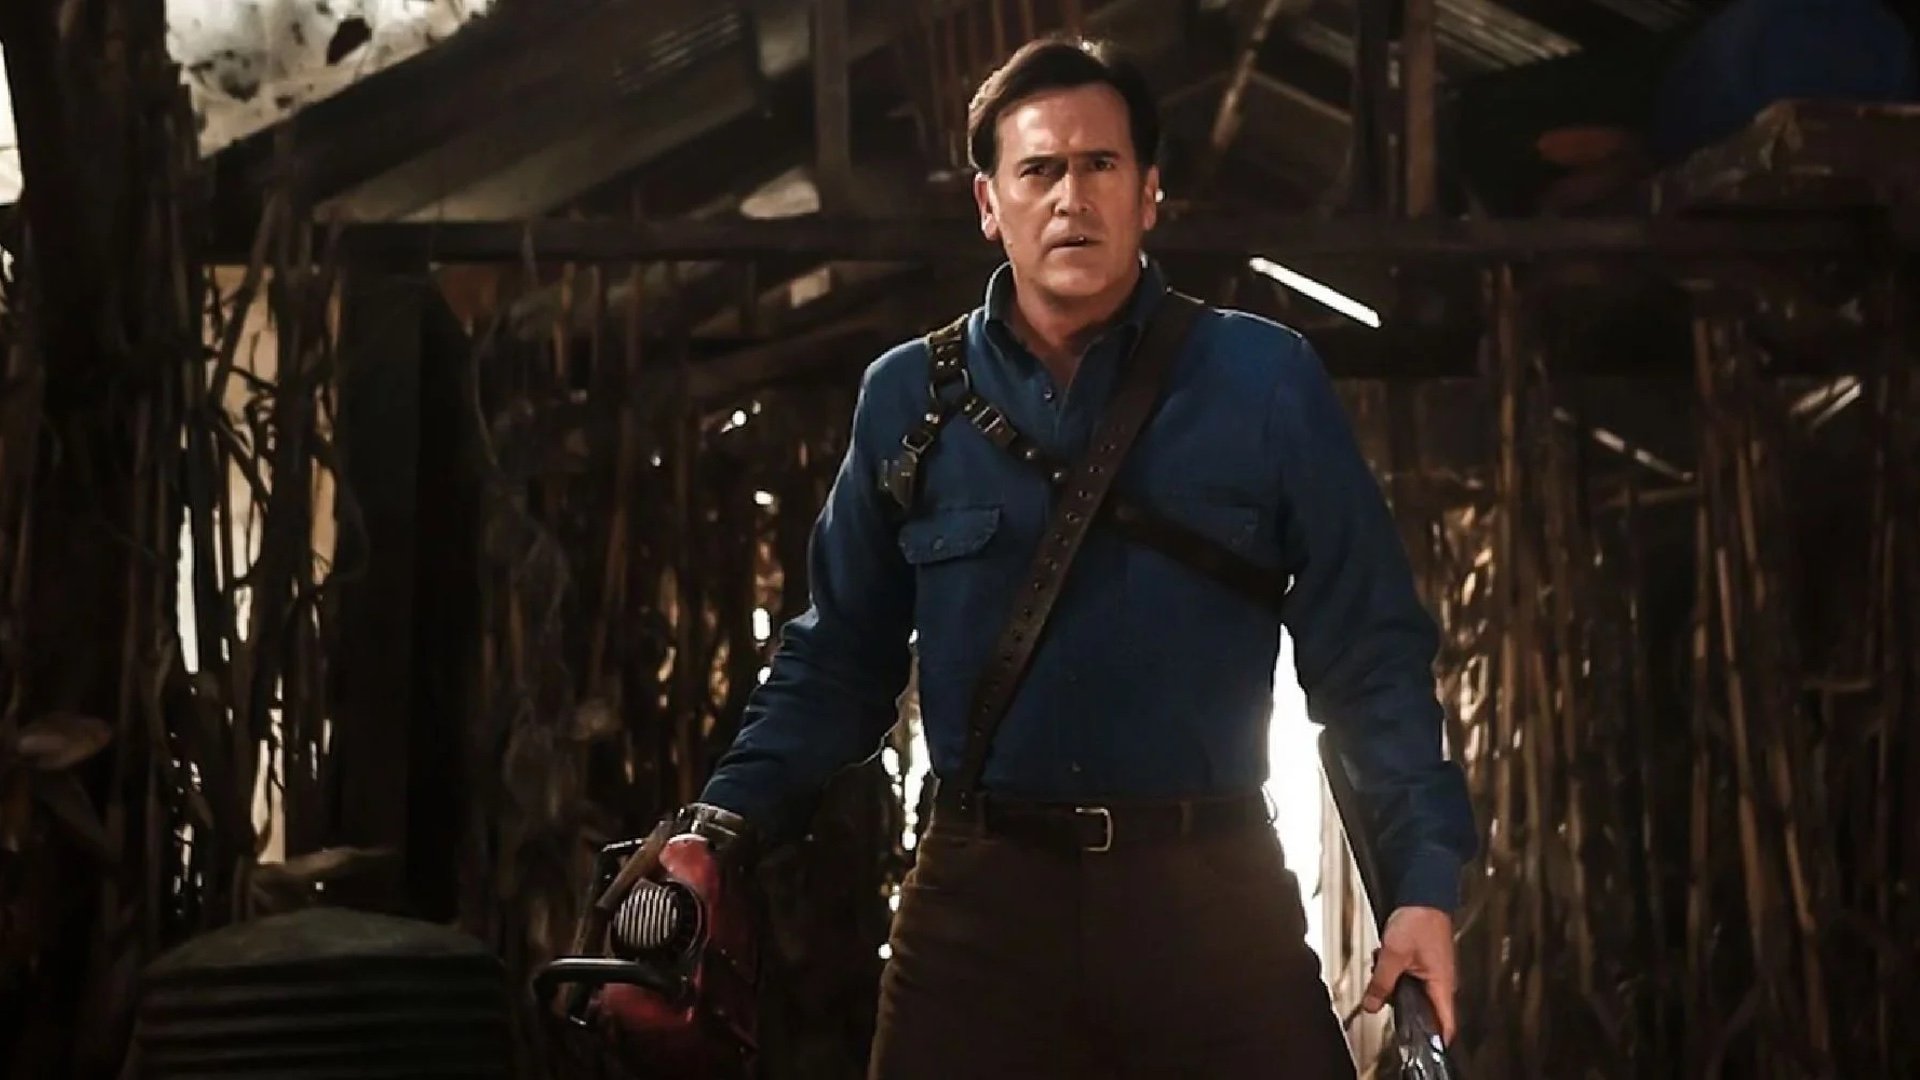 EVIL DEAD RISE Is an Exhilarating Apartment Horror Thrill Ride